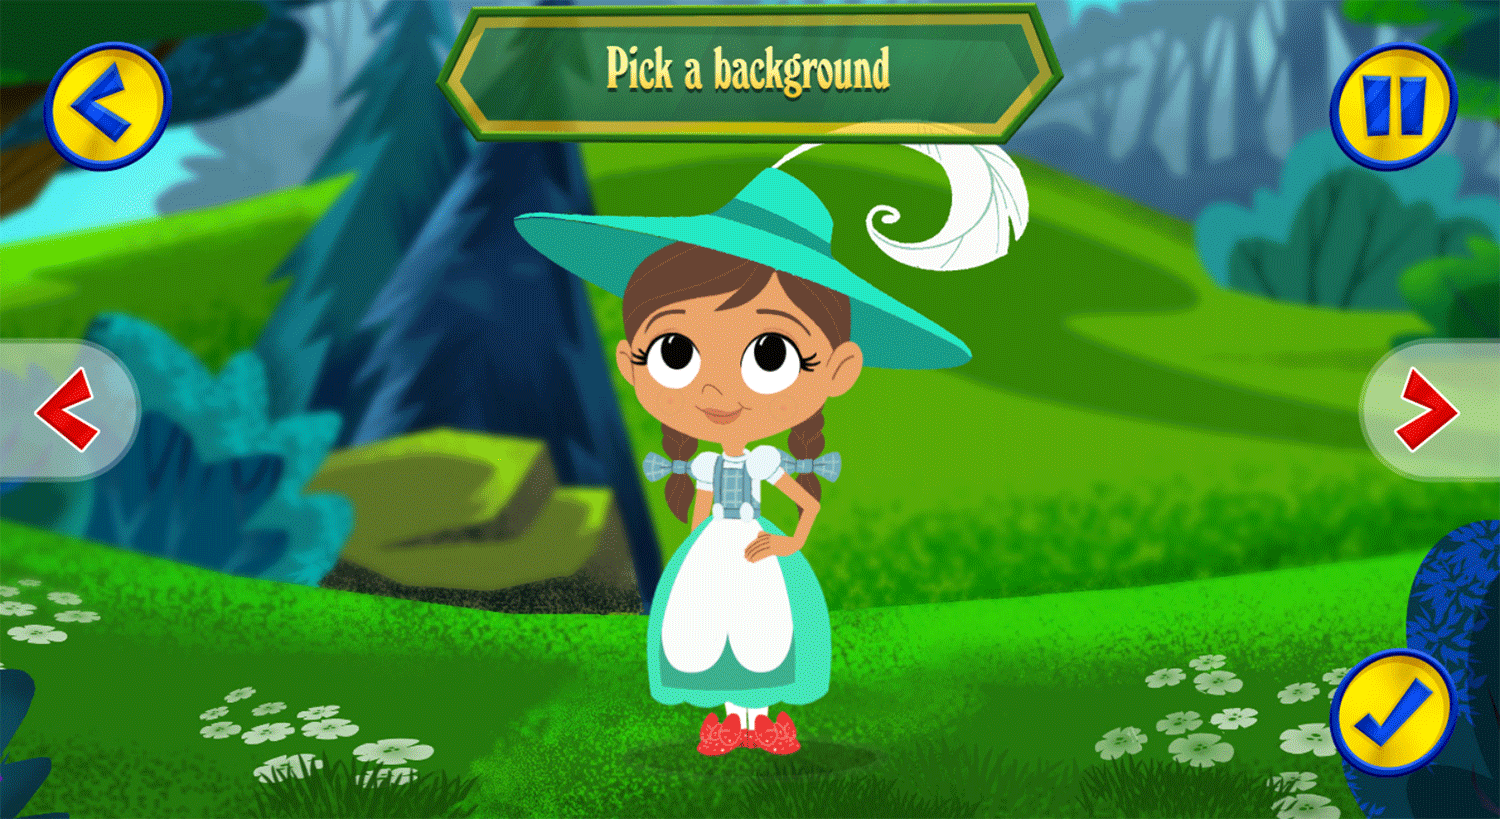 Dorothy and the Wizard of Oz Dress Up Game Pick Background Screenshot.